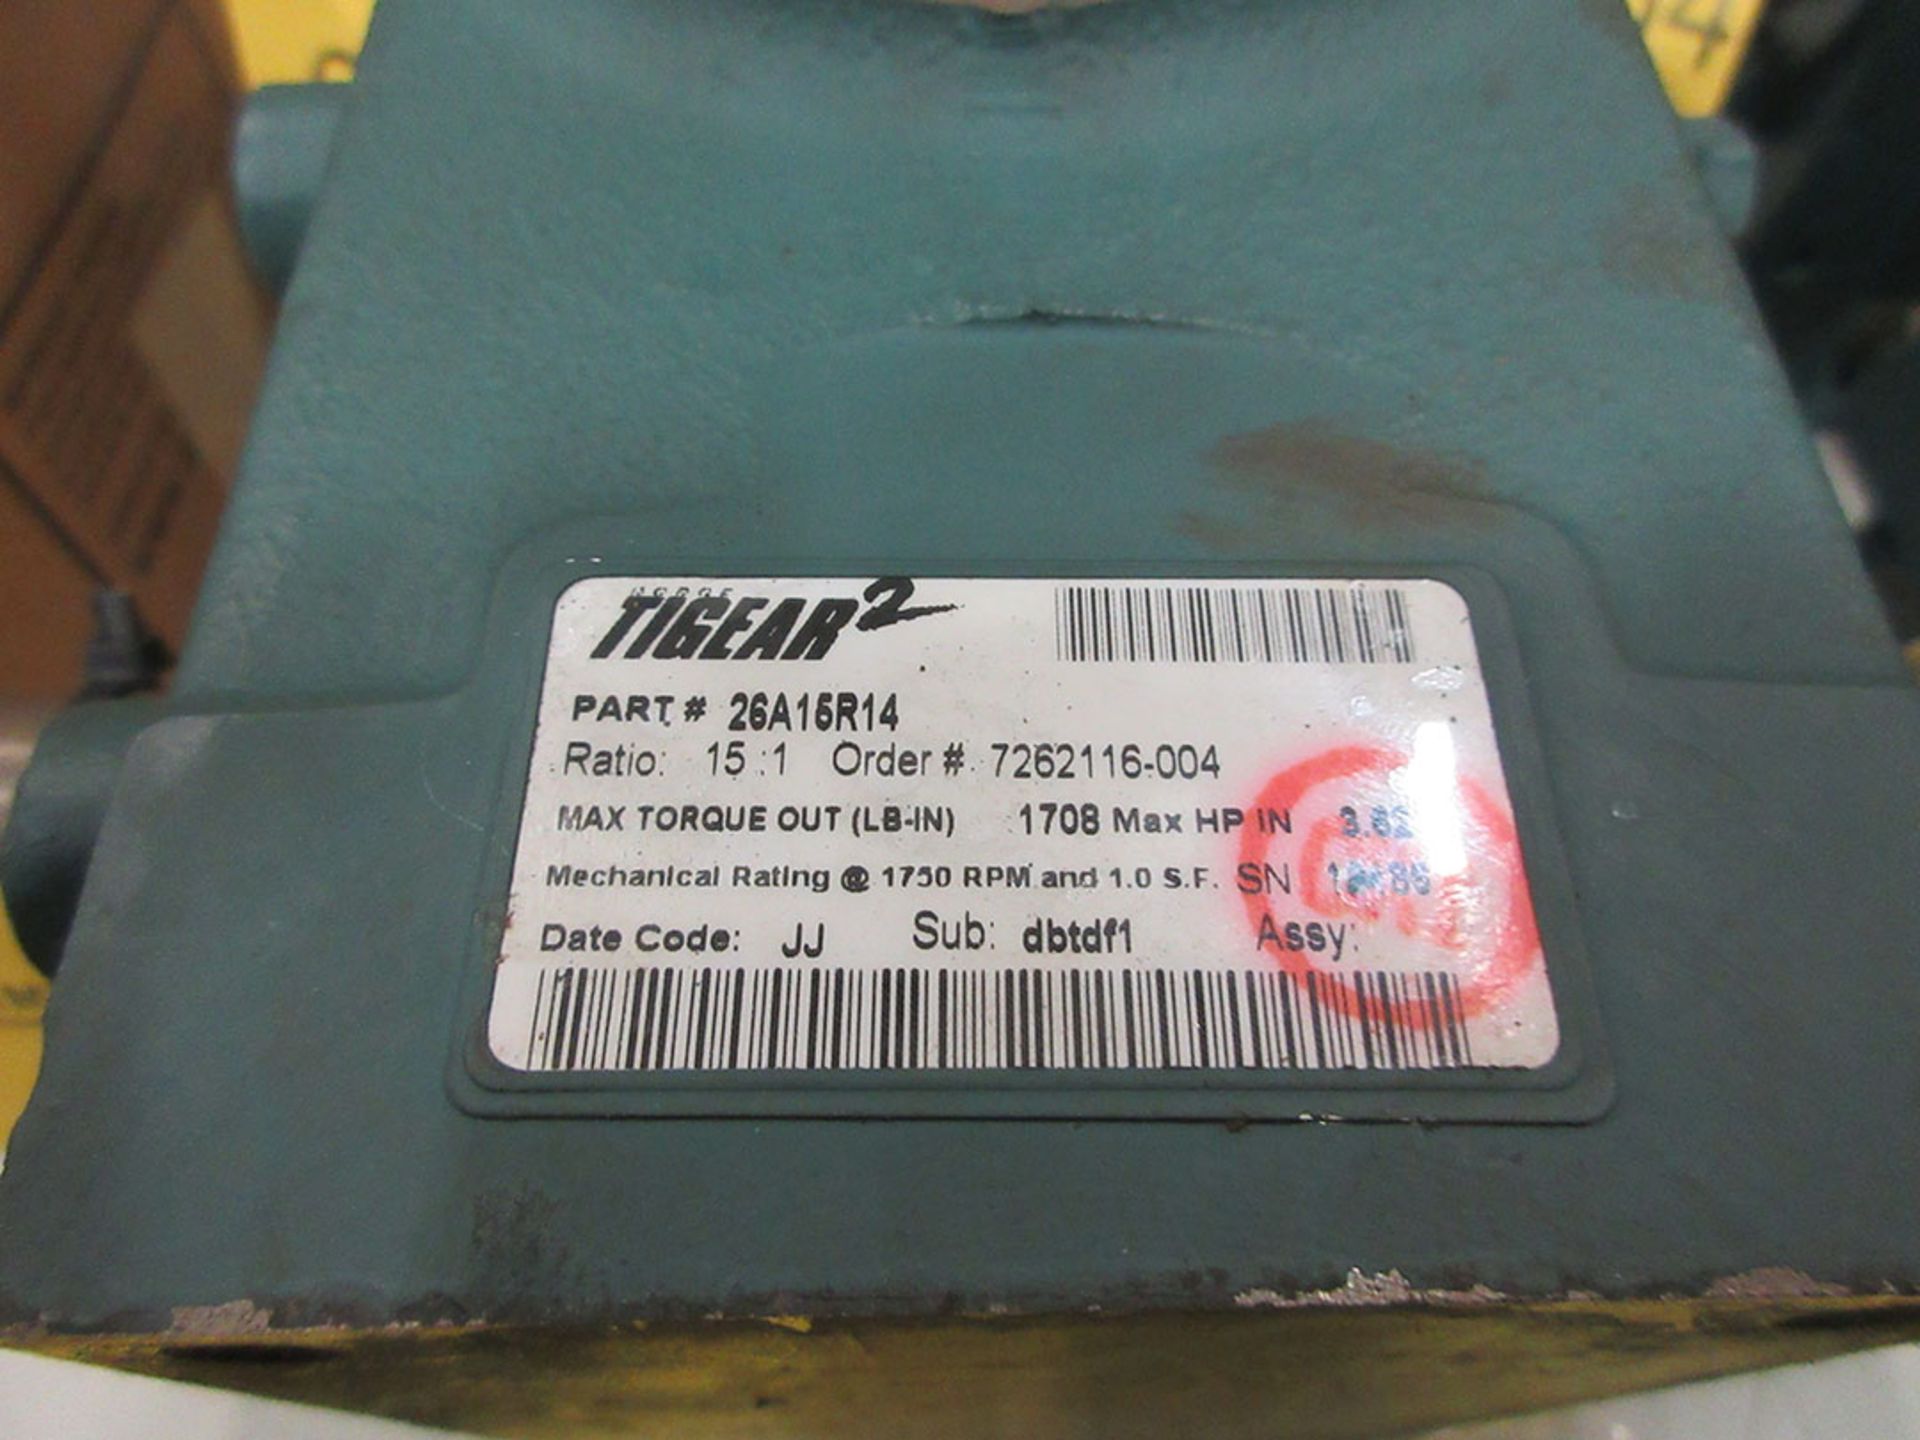 TIGEAR 2 REDUCER; PN 26A15R14, 15:1 RATIO - Image 2 of 2